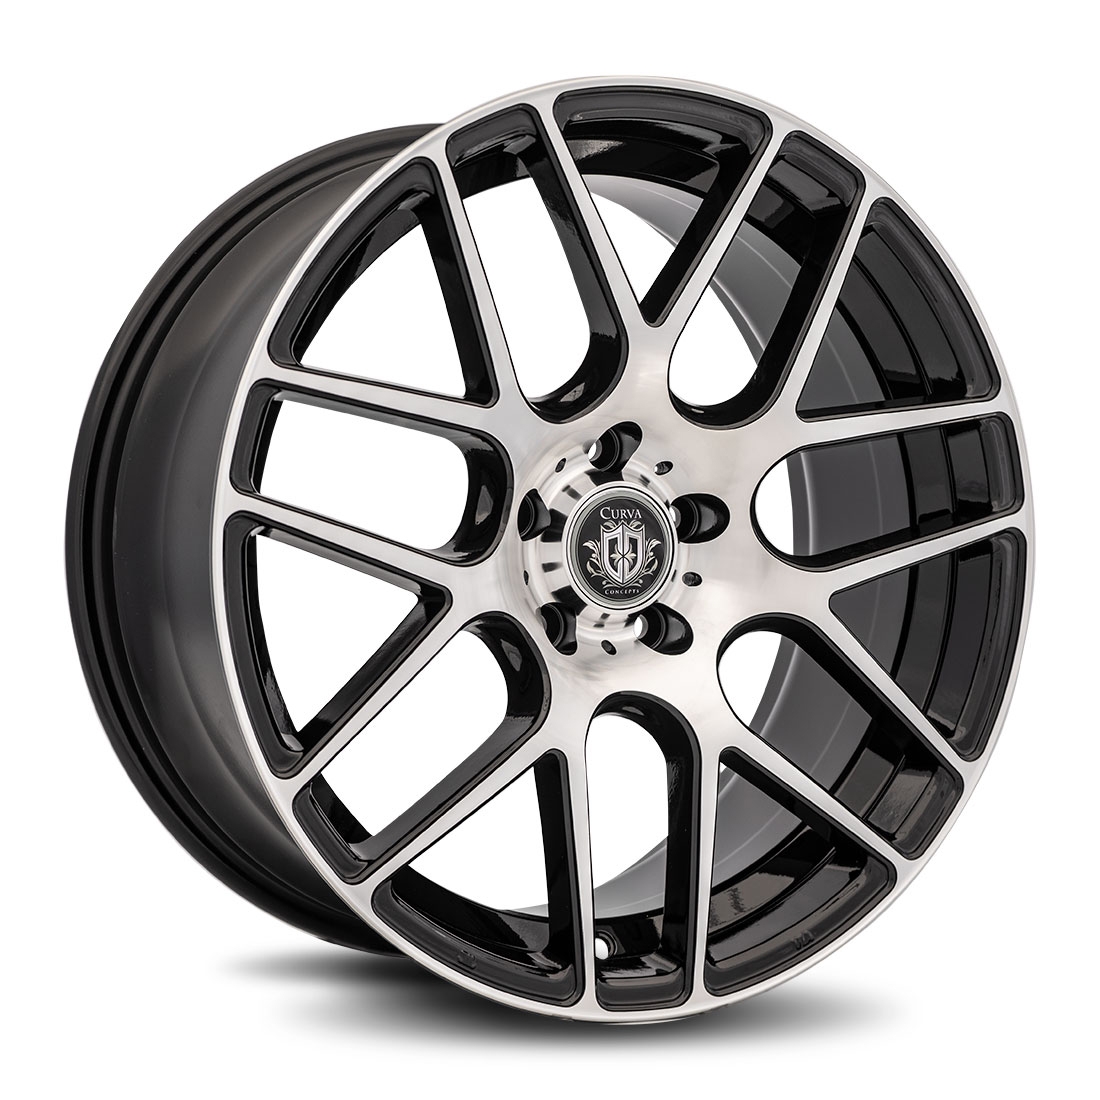 Curva Concepts C7 Aftermarket Wheels 19 Inch Black Machined Face